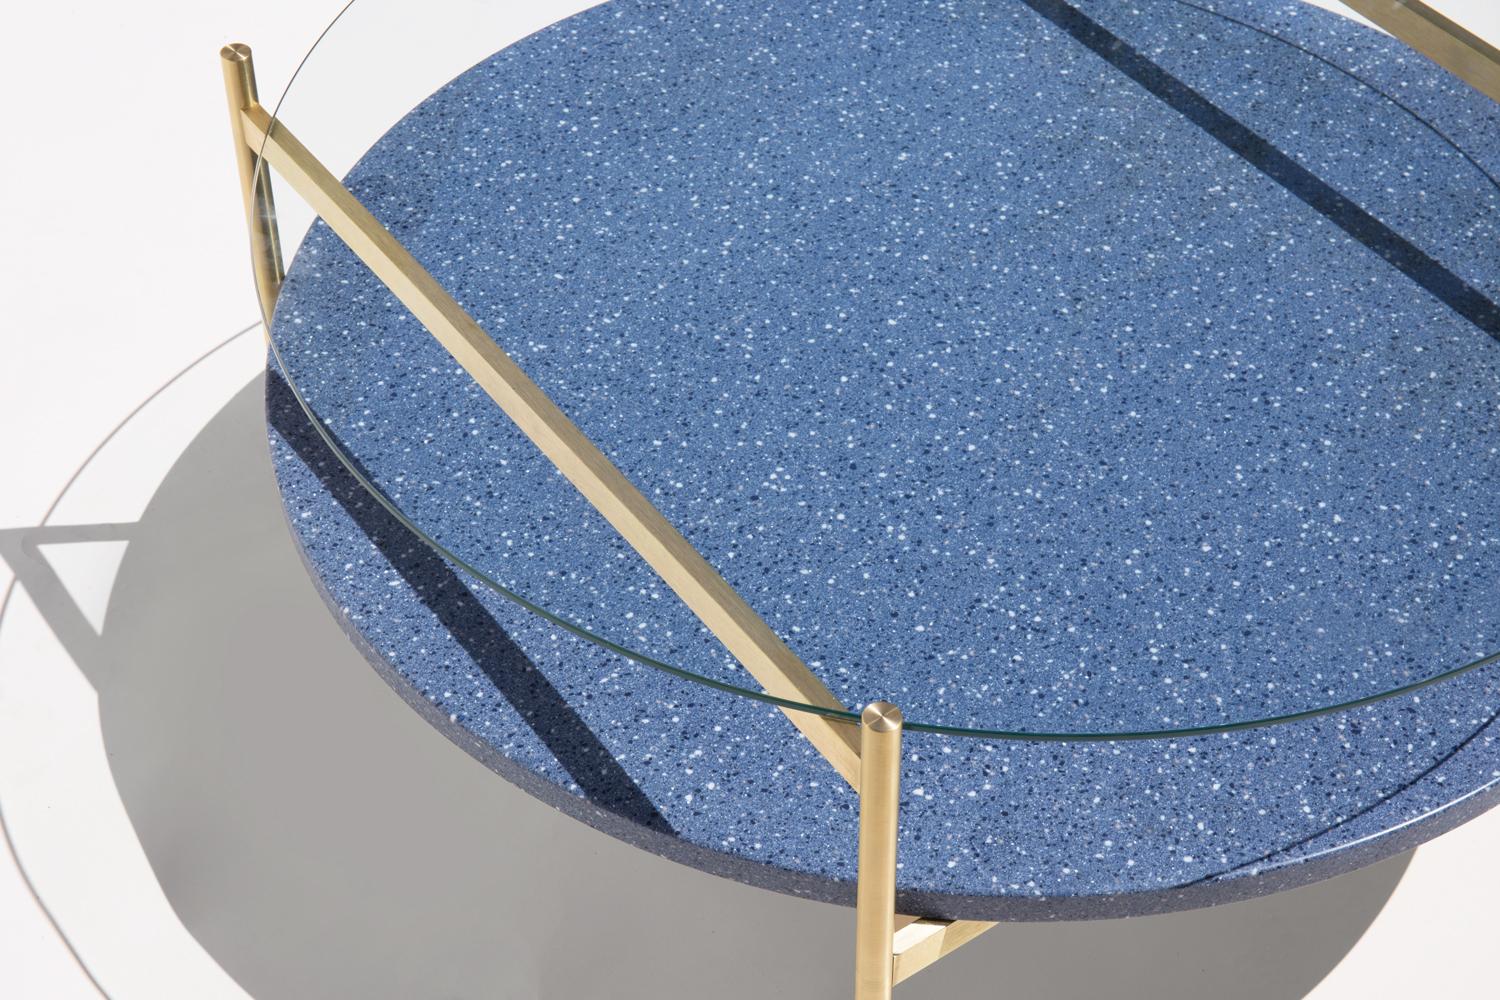 Made to order. Please allow 6 weeks for production.

Brass Frame / Clear Glass / Blue Mosaic

The Duotone Furniture series is based on a modular hardware system that pairs sturdy construction with visual lightness and a range of potential